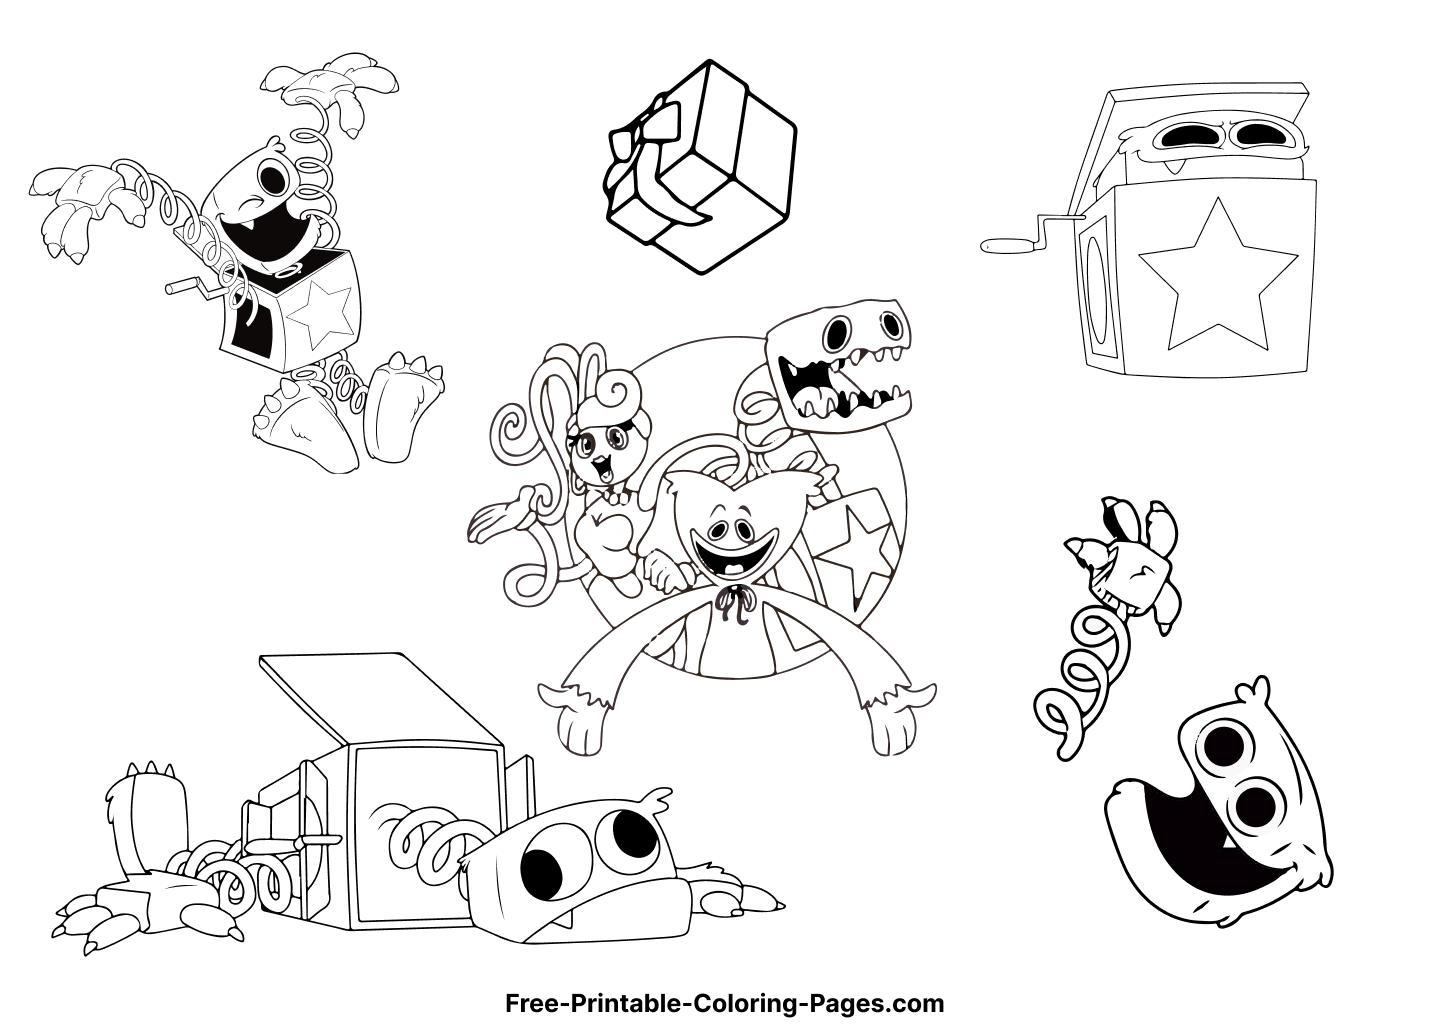 Get Creative with Boxy Boo: 32 Coloring Pages to Download and Print